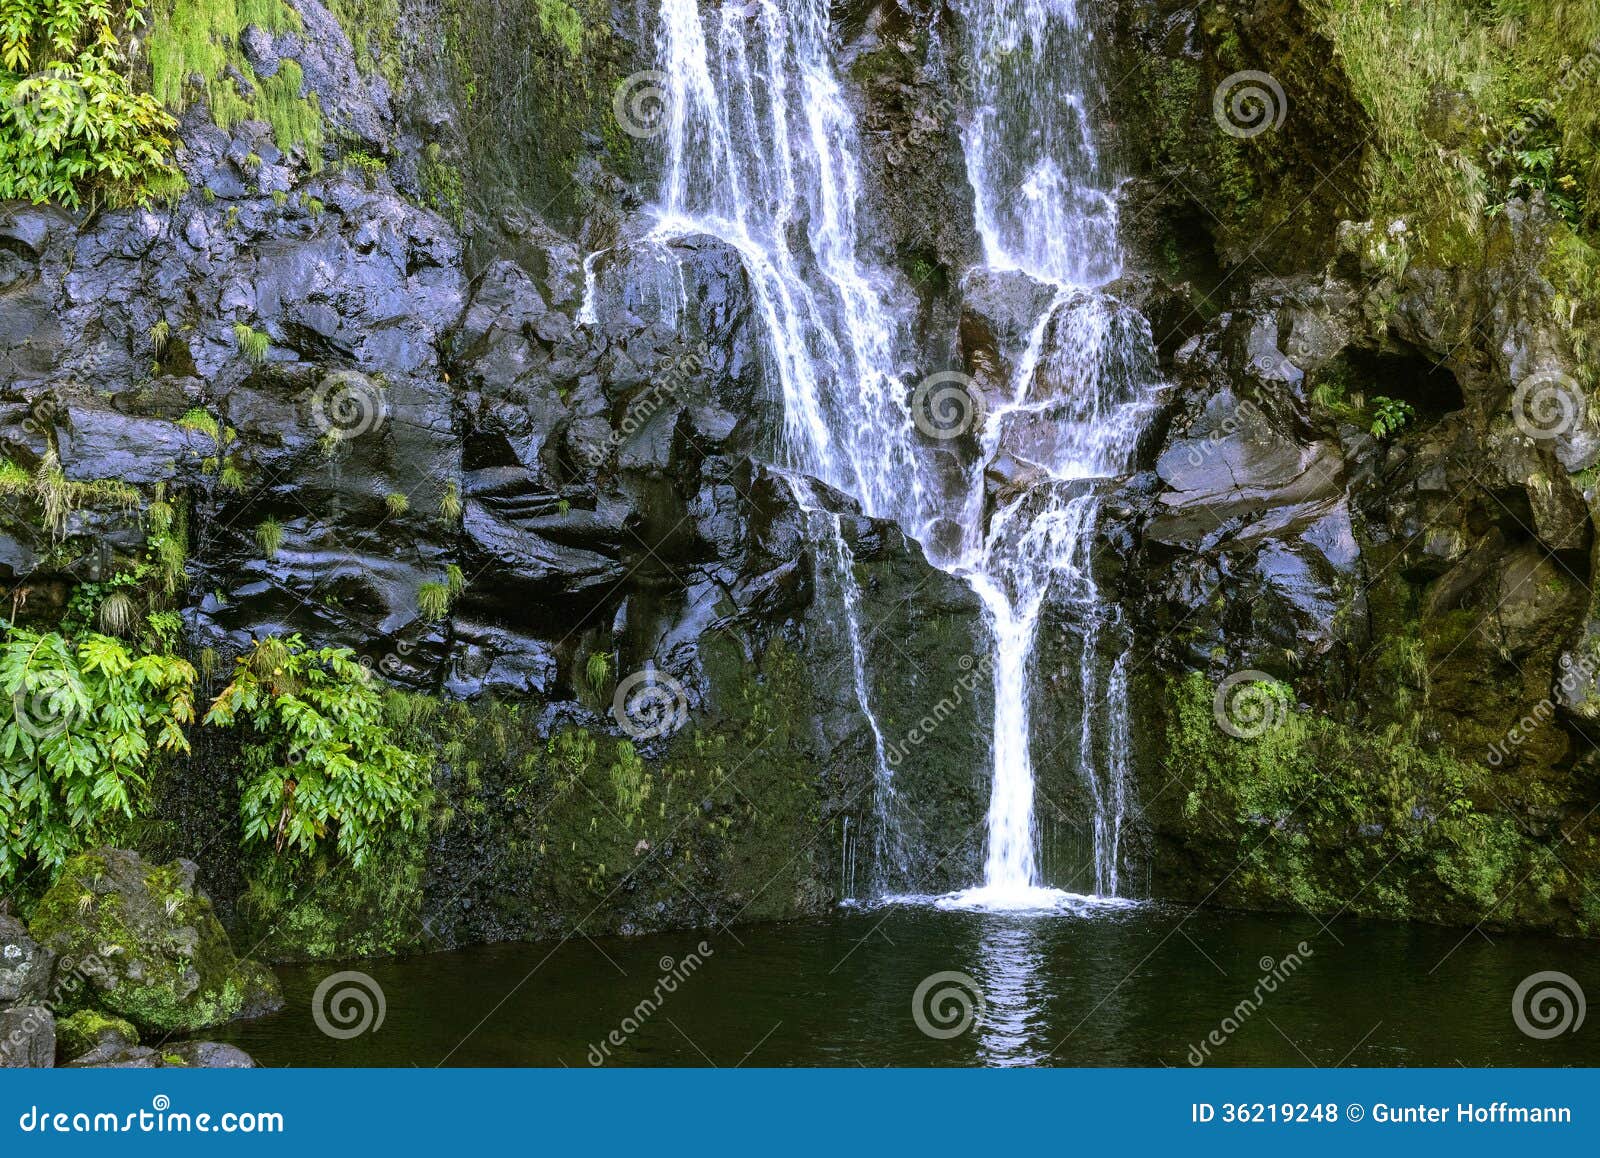 waterfalls on flores island, azores archipelago (portugal)